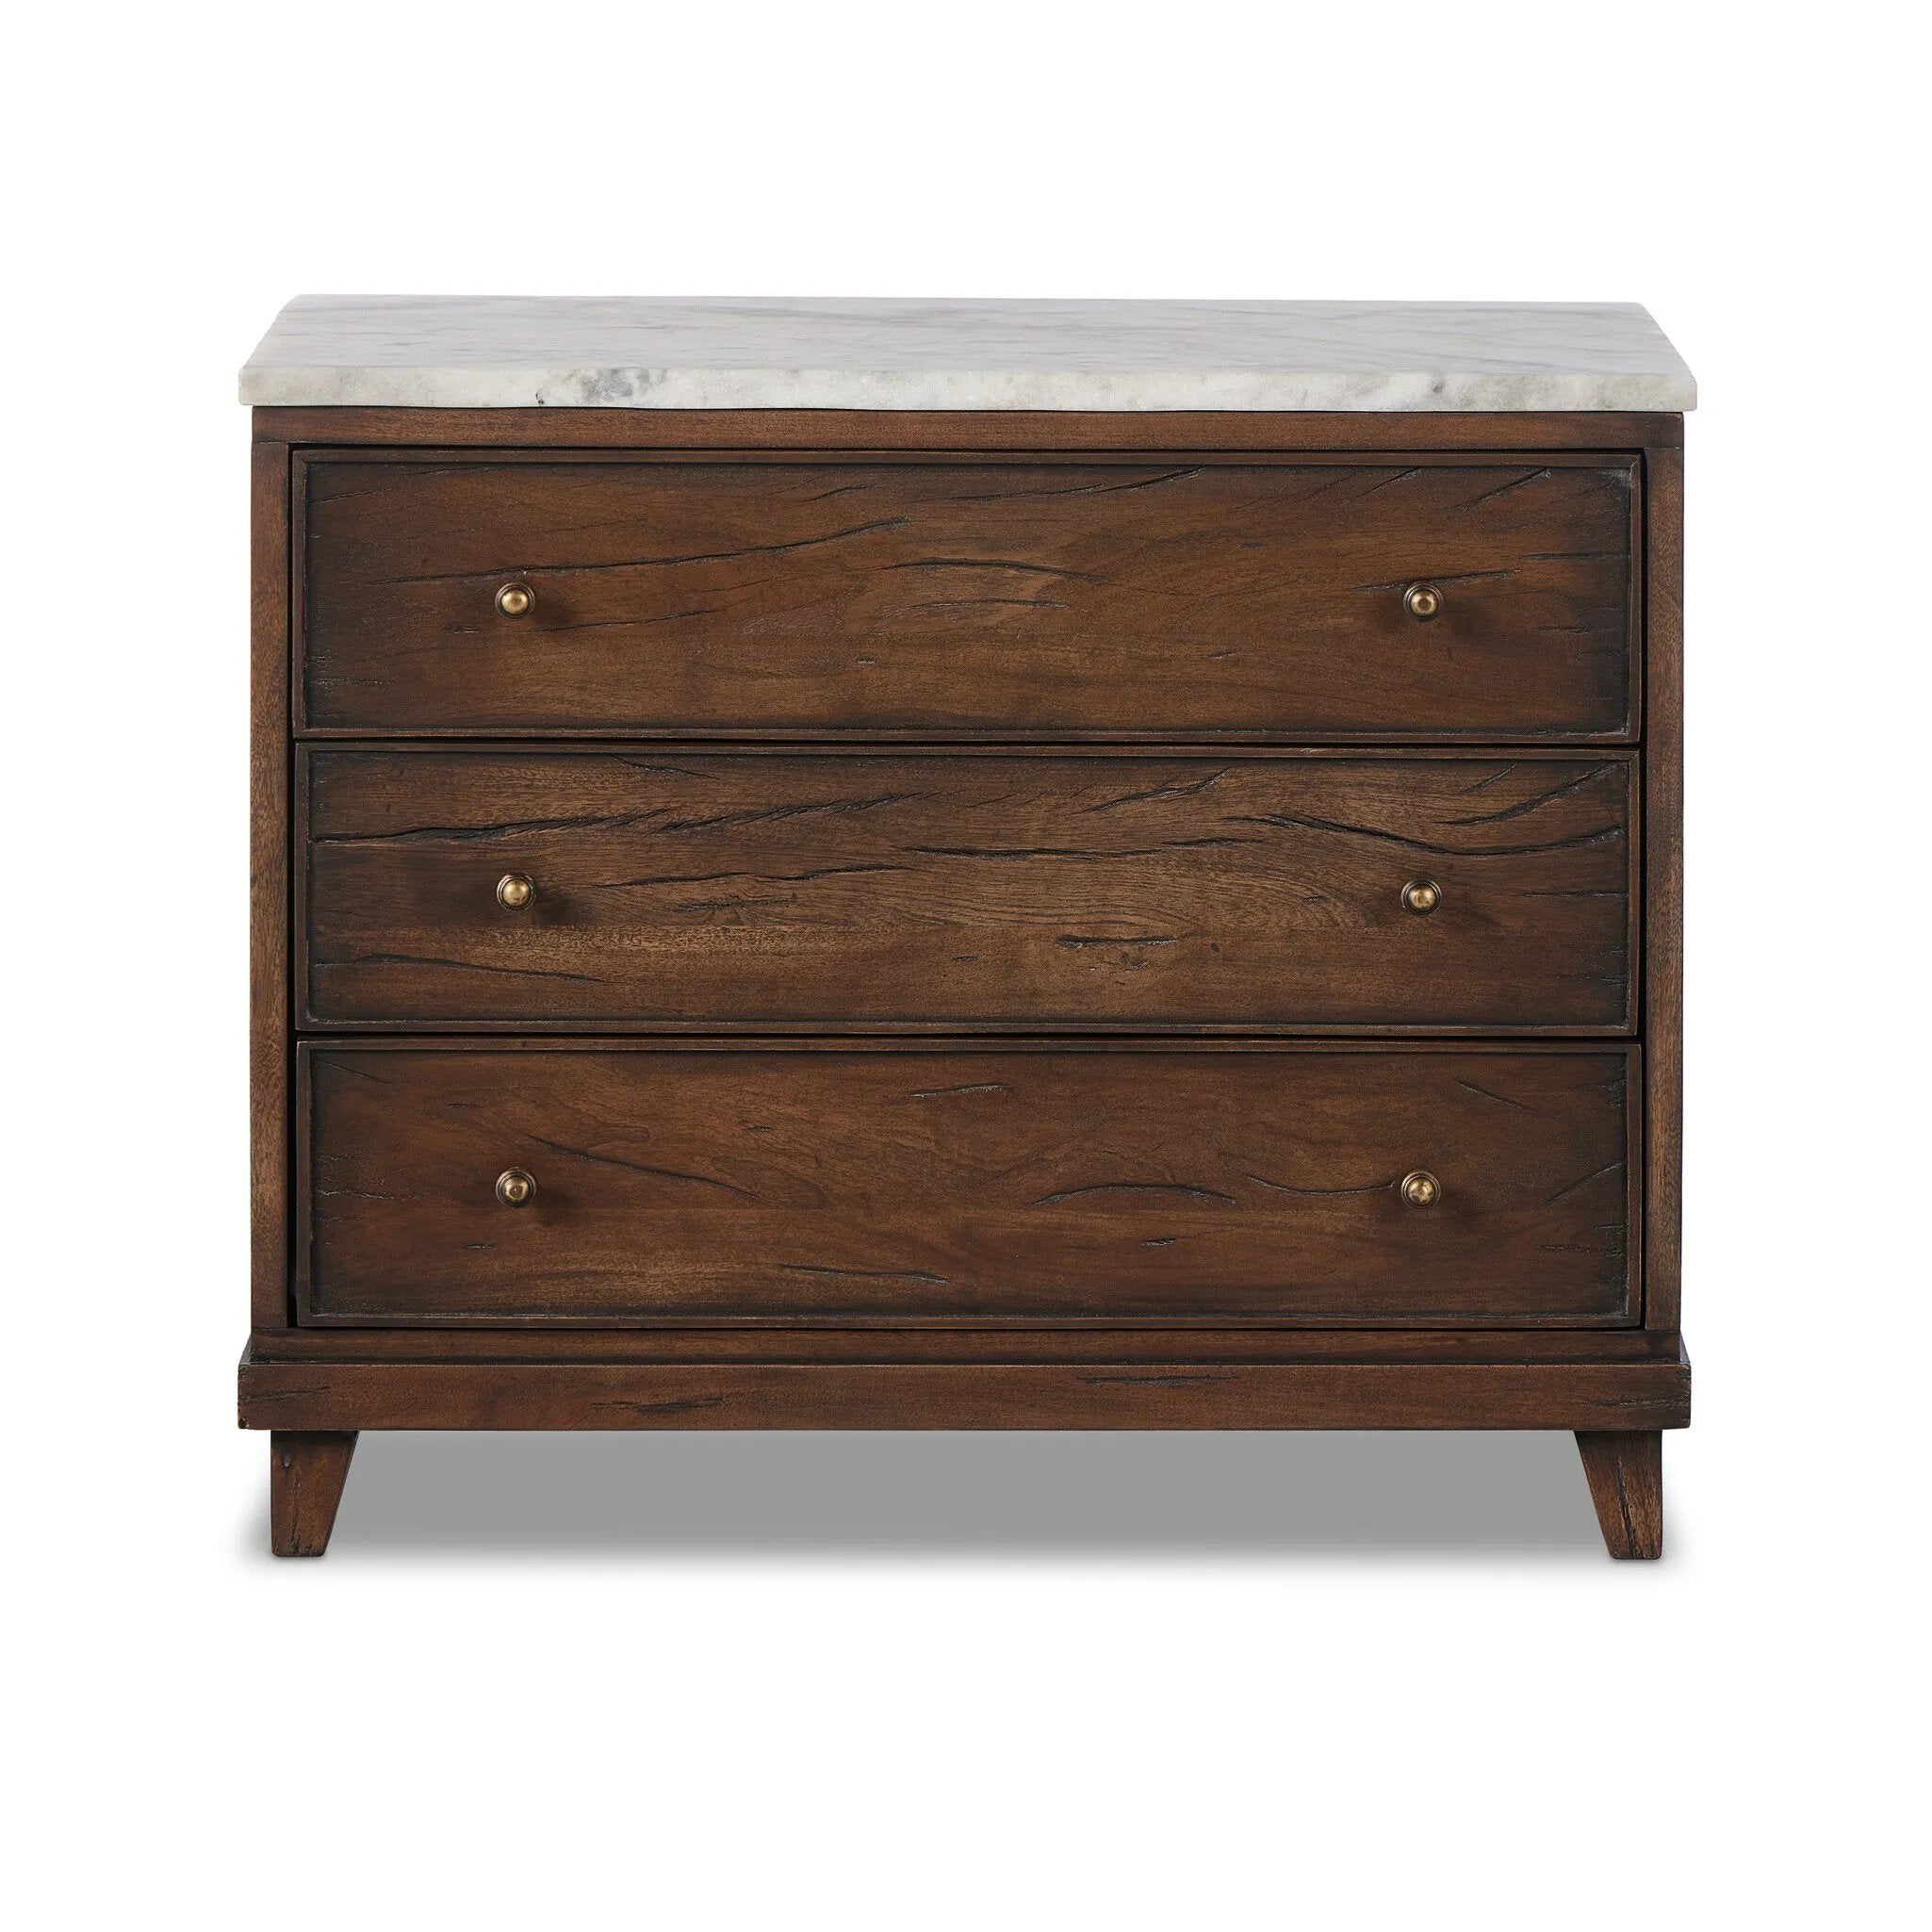 Capturing the charm of vintage French storage, this solid mango wood nightstand stands tall with a polished marble top and softened ogee edges. Three spacious drawers are fitted with classic brass-button hardware. Natural marks and cracks are characteristic of the reclaimed wood.Collection: Harmo Amethyst Home provides interior design, new home construction design consulting, vintage area rugs, and lighting in the Newport Beach metro area.